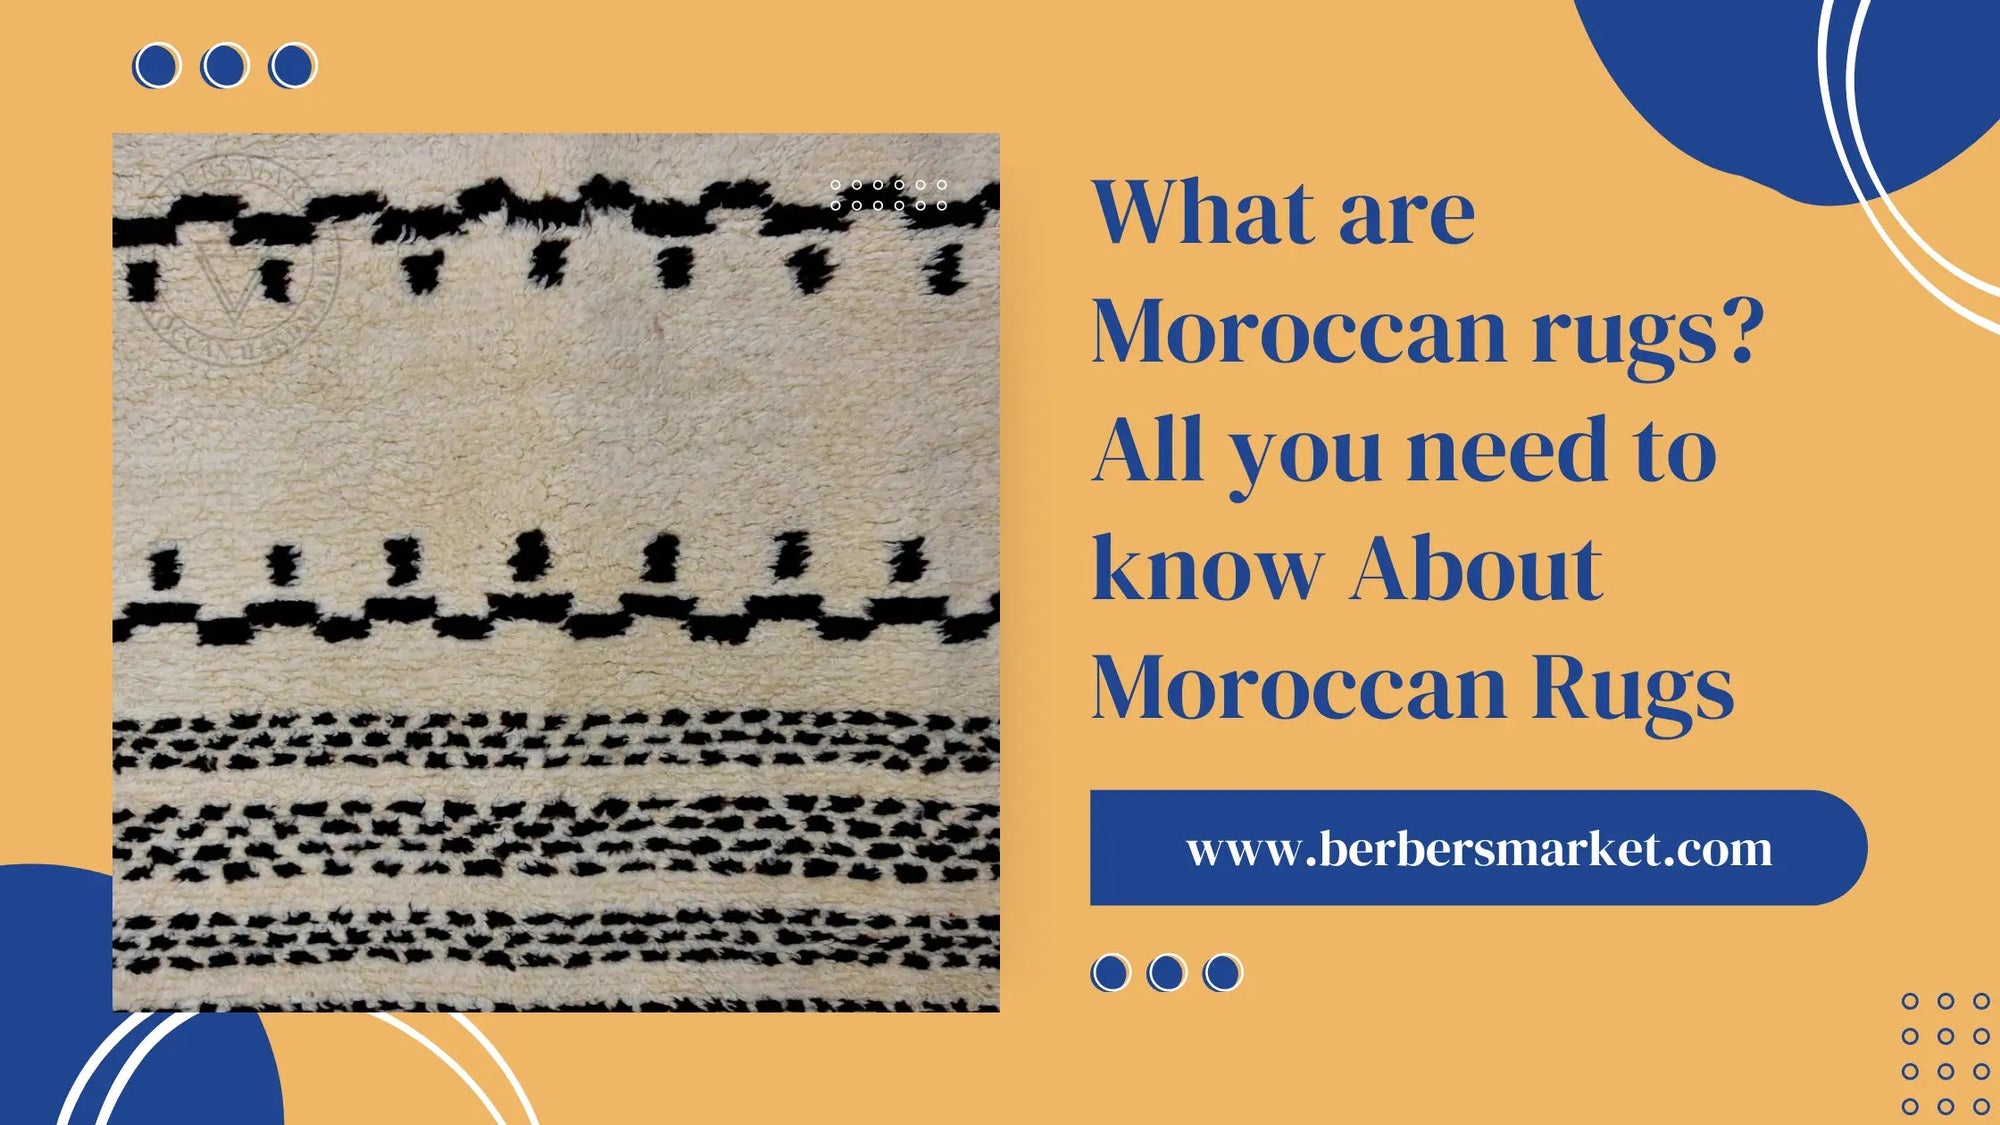 Blog banner talking about: "What are Moroccan rugs? All you need to know About Moroccan Rugs" with a picture showing a Beni ourain rug.